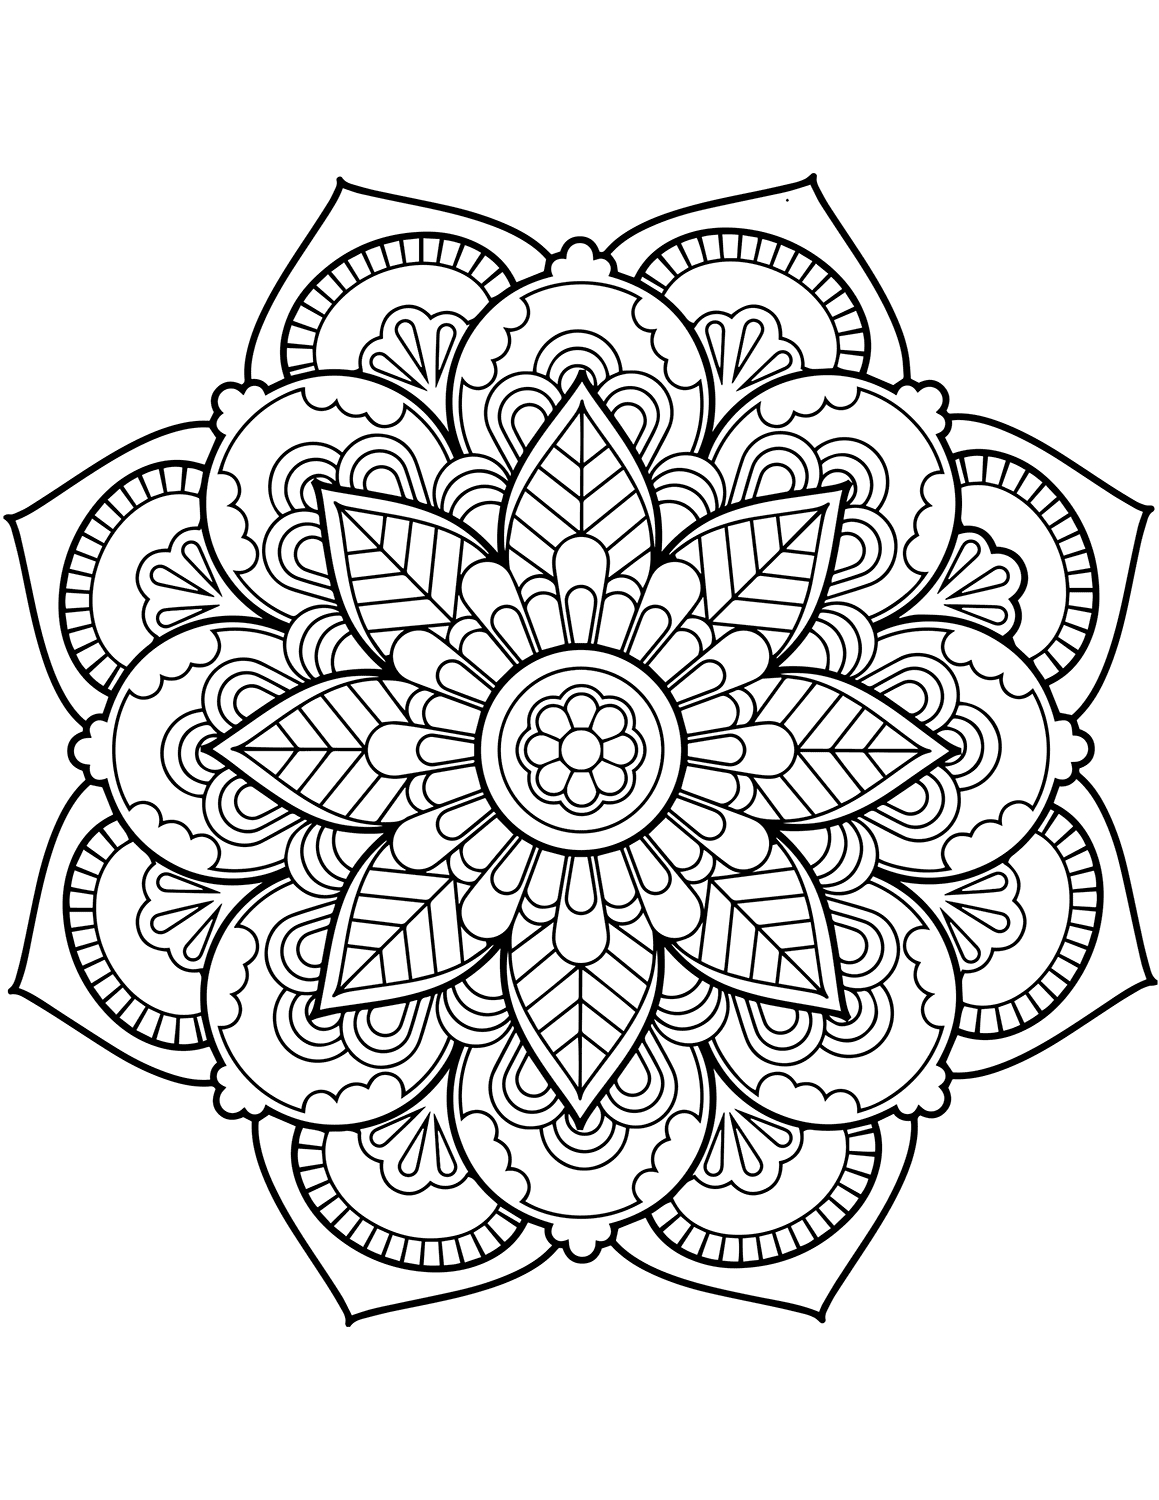 Flower Mandala Coloring Pages - Best Coloring Pages For Kids - Mandala Coloring Free Printable